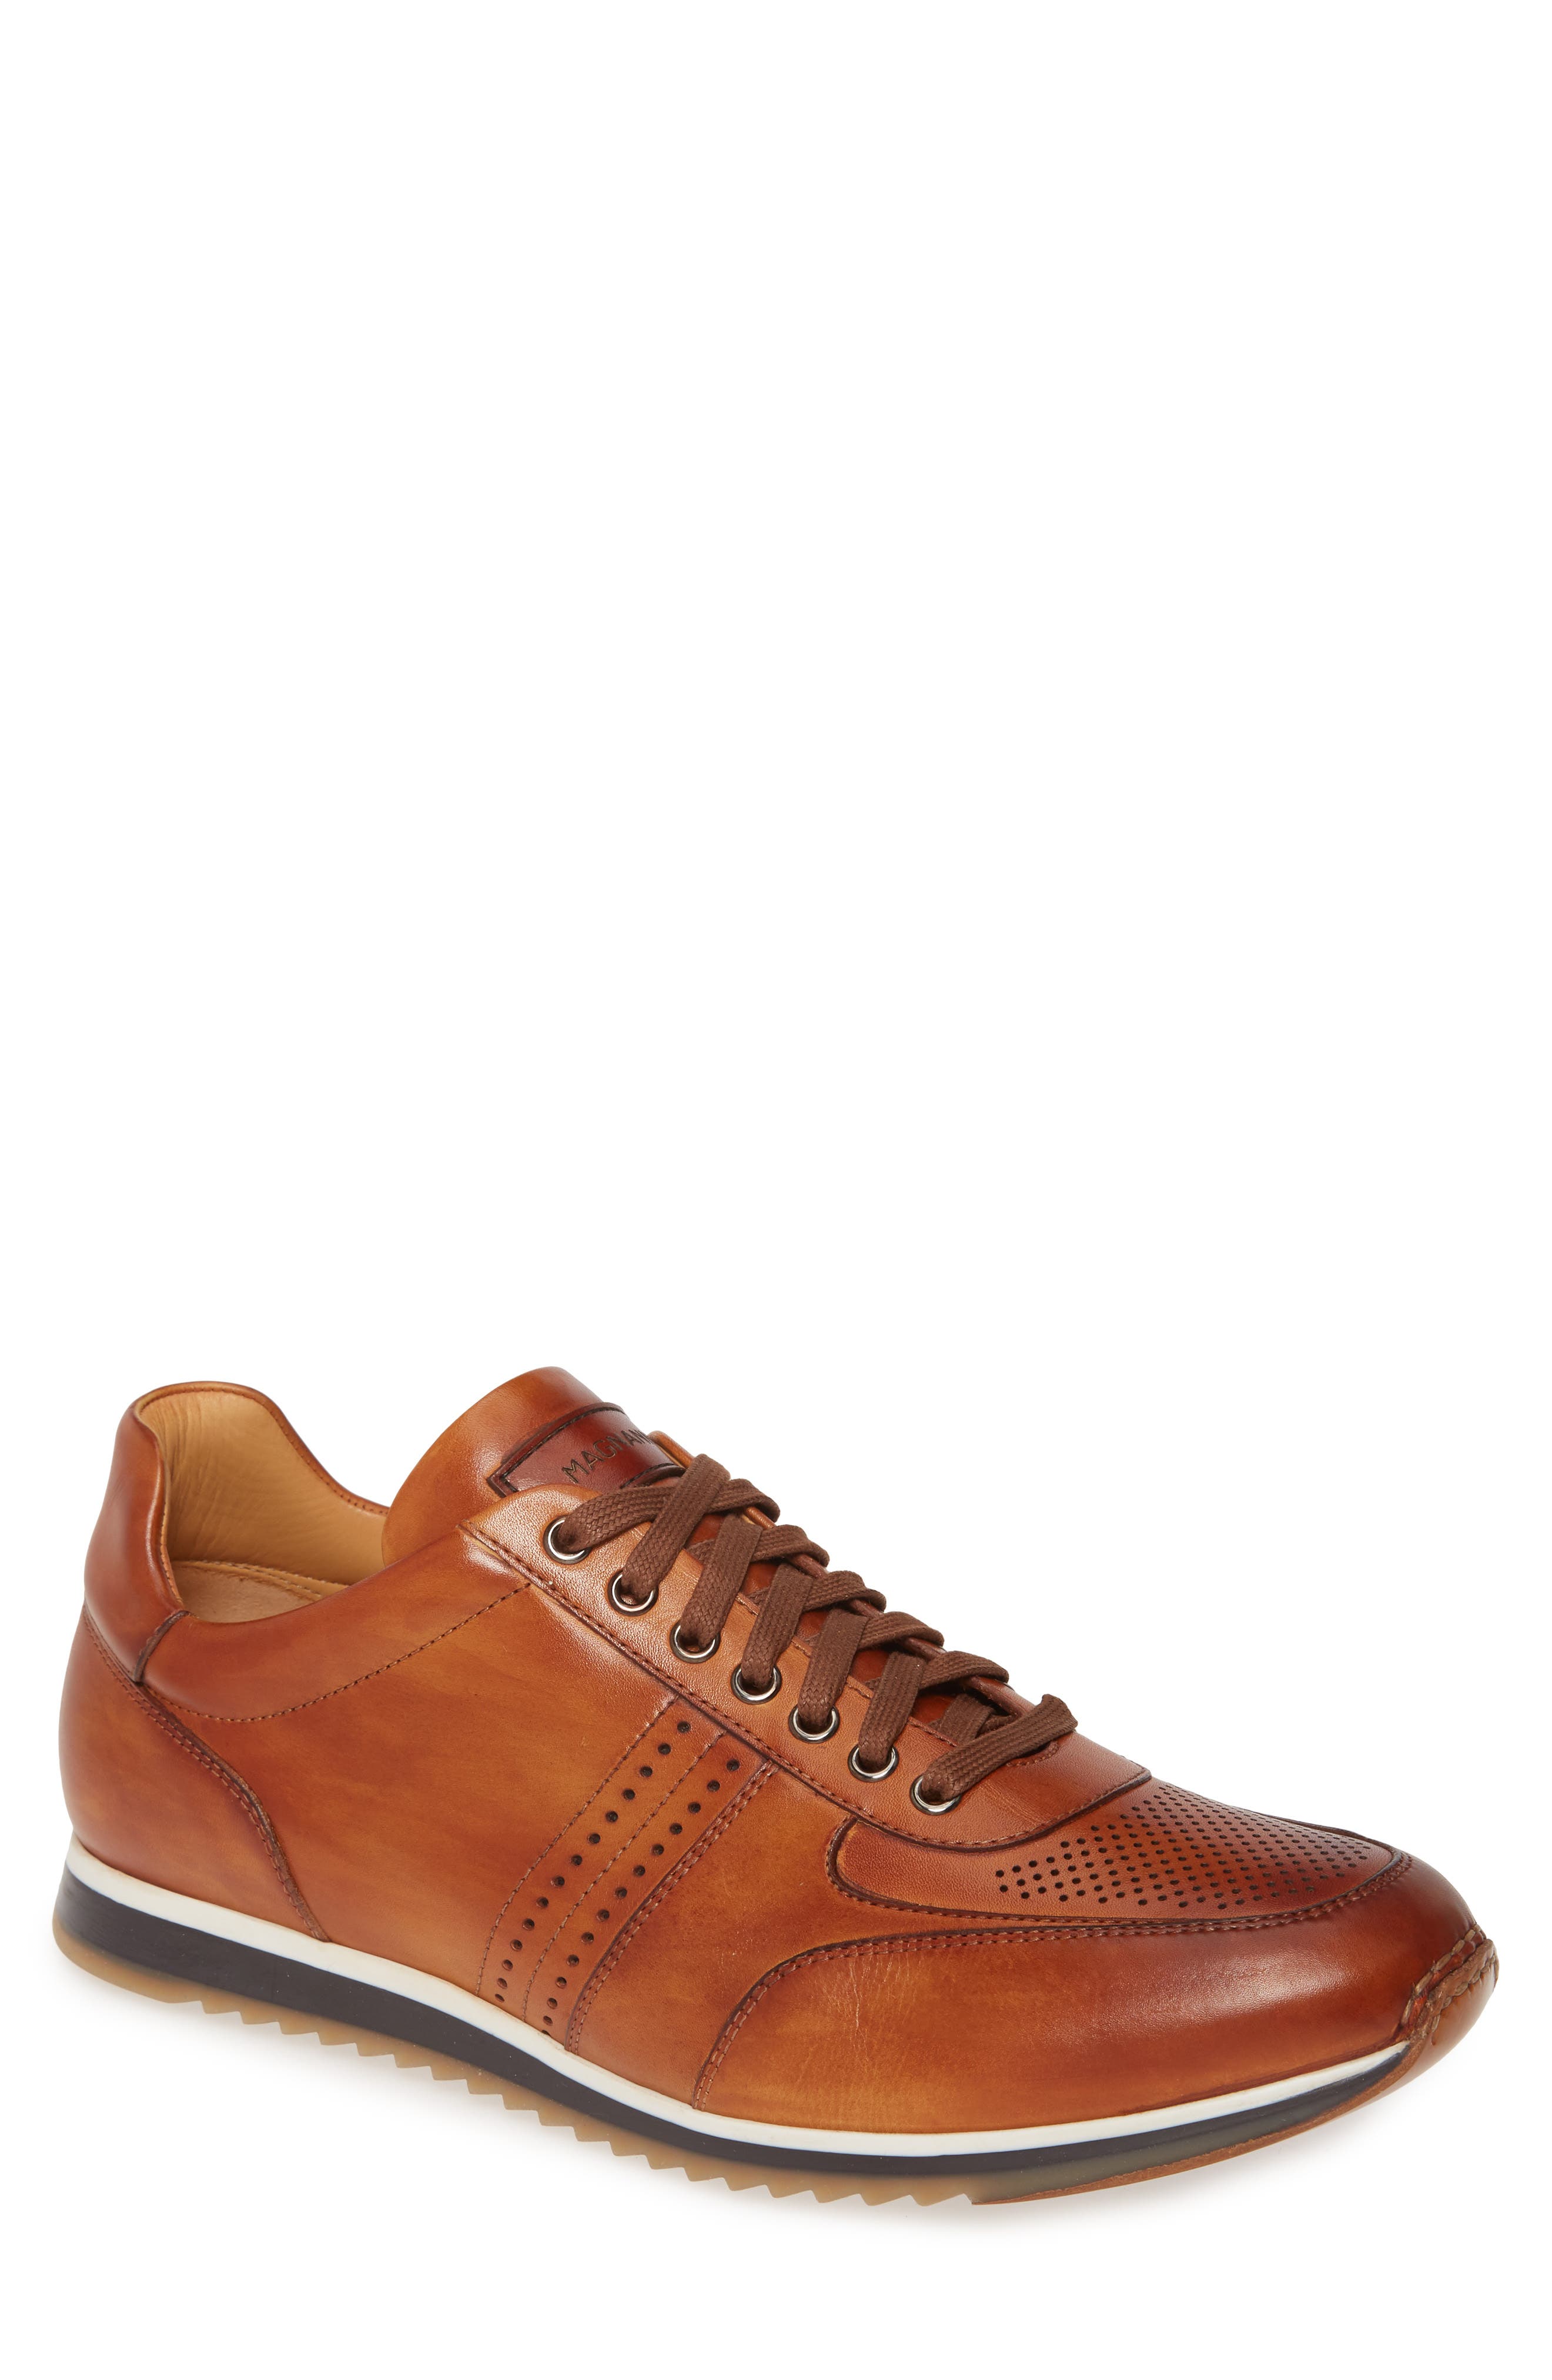 magnanni sneakers